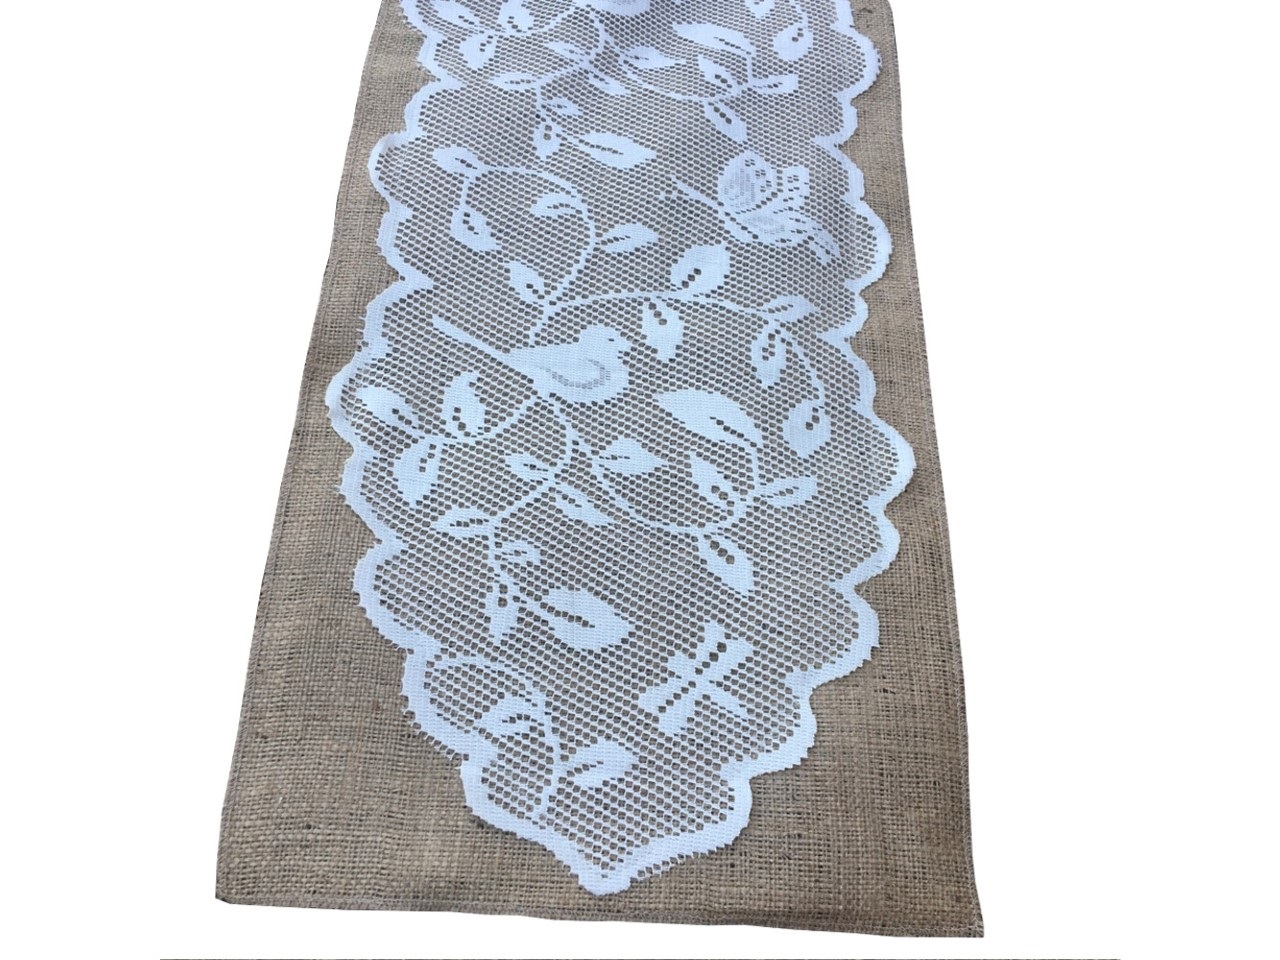 Burlap Table Runner With Lace - Bird Design 14" x 96"